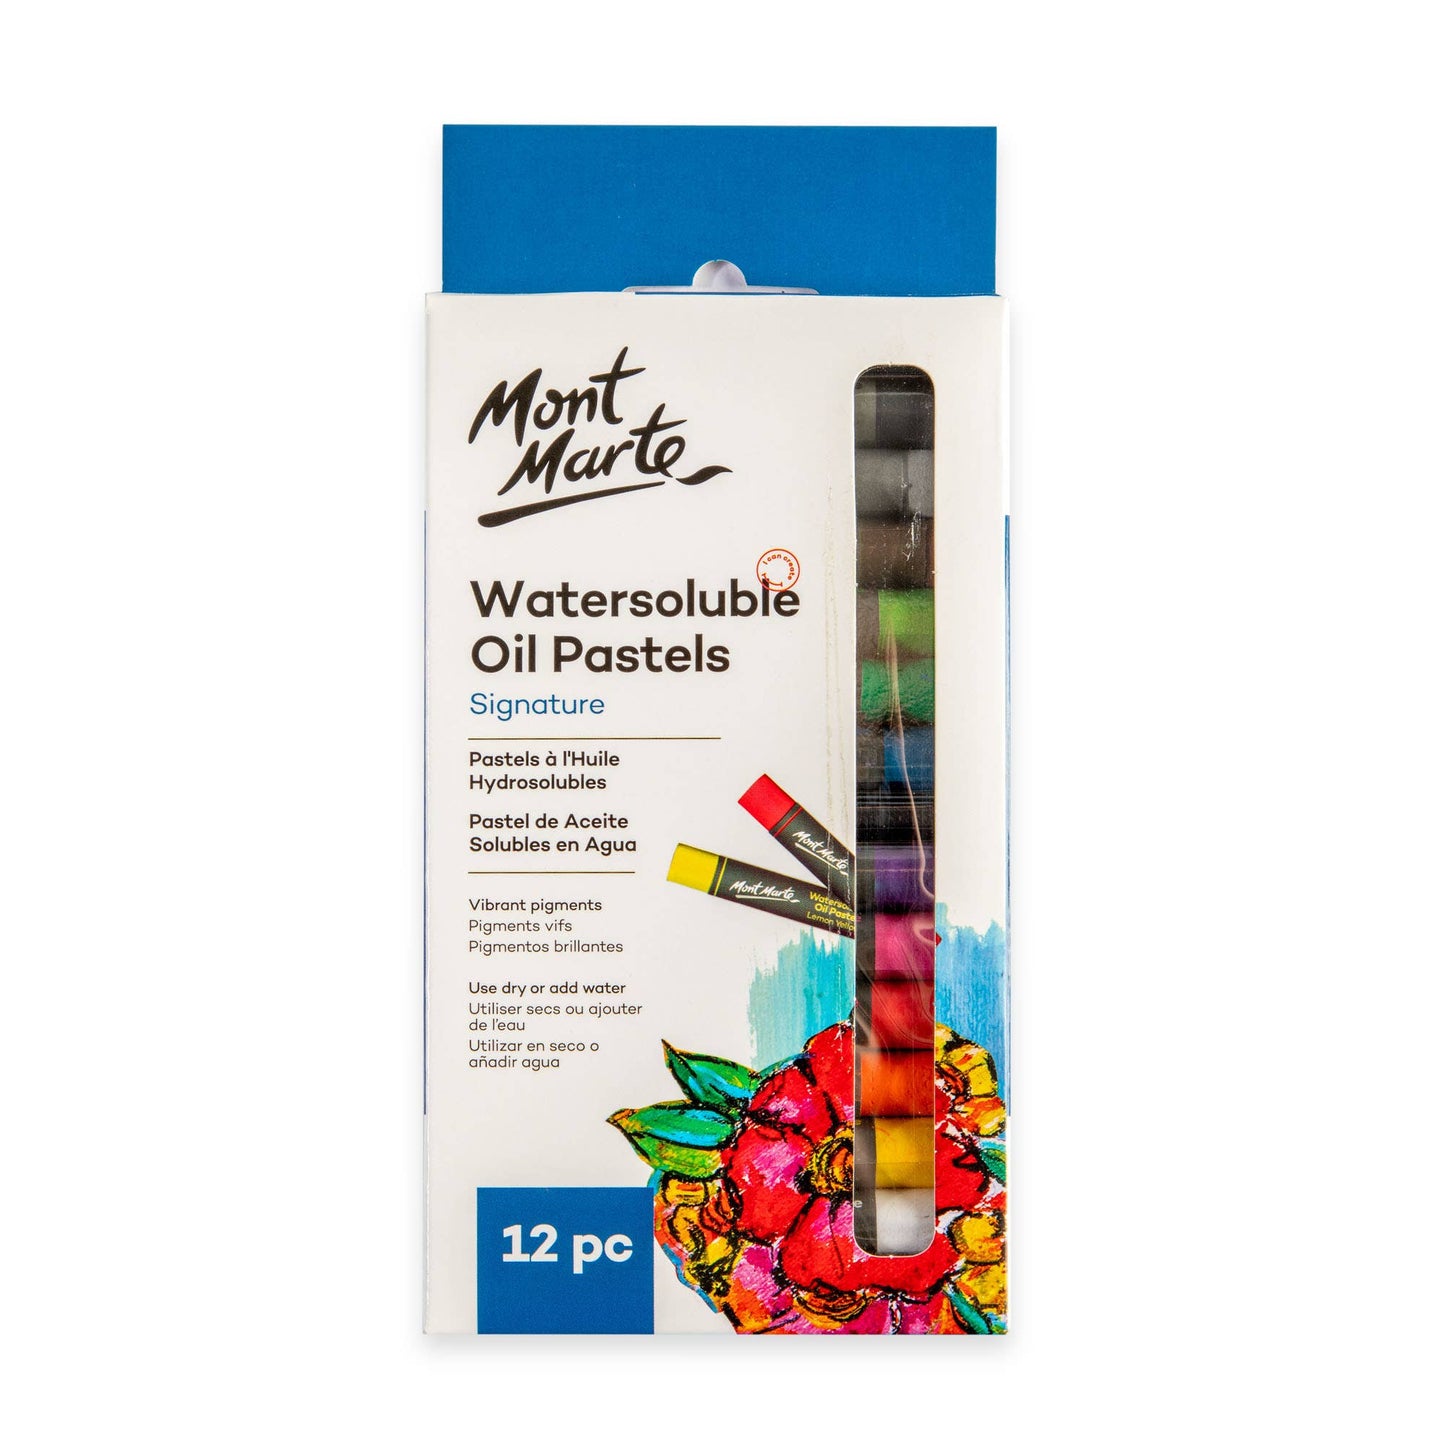 Mont Marte Usa, Inc. - Water-soluble Oil Pastels Signature 12pc